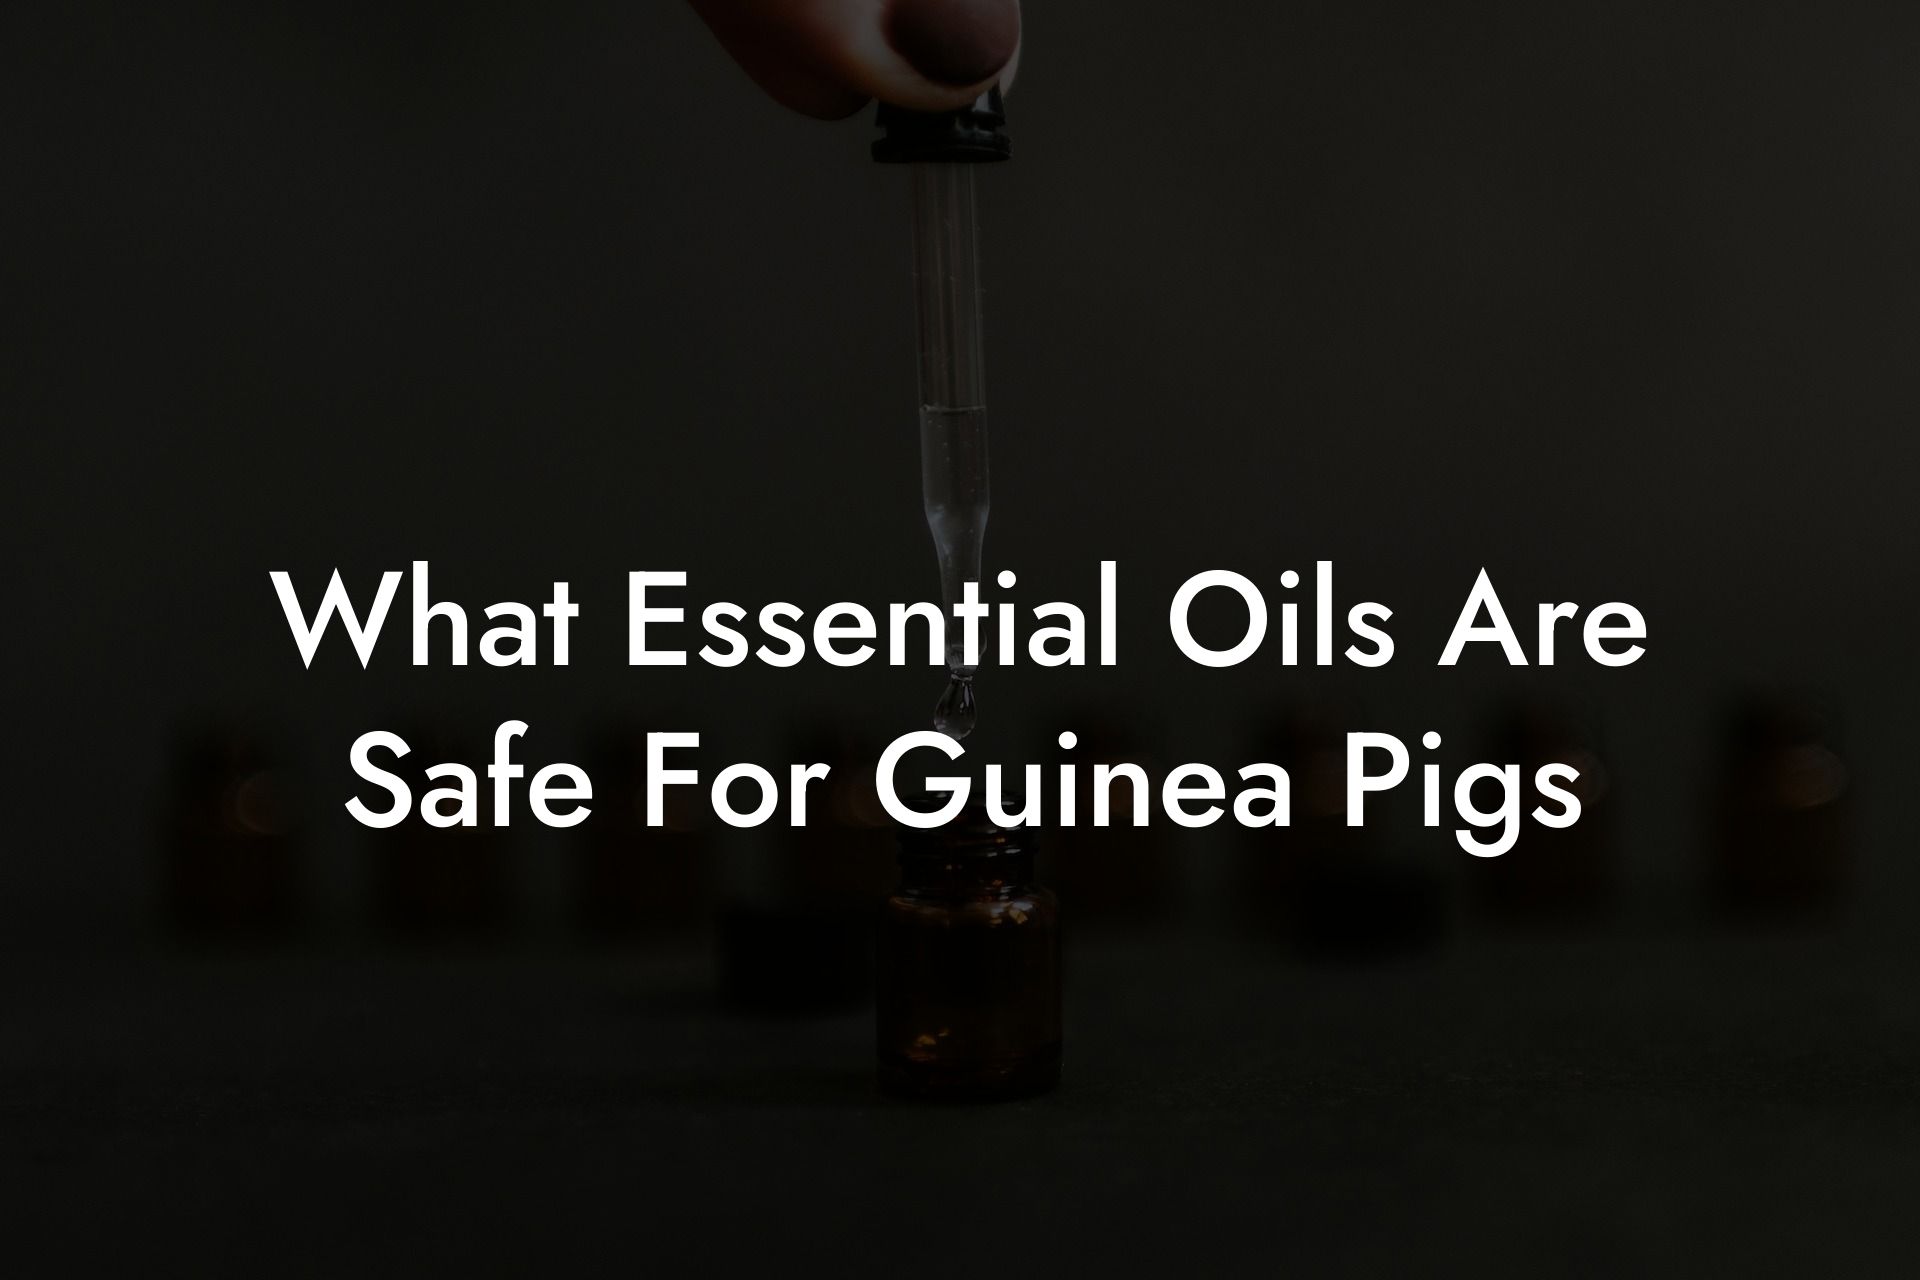 What Essential Oils Are Safe For Guinea Pigs